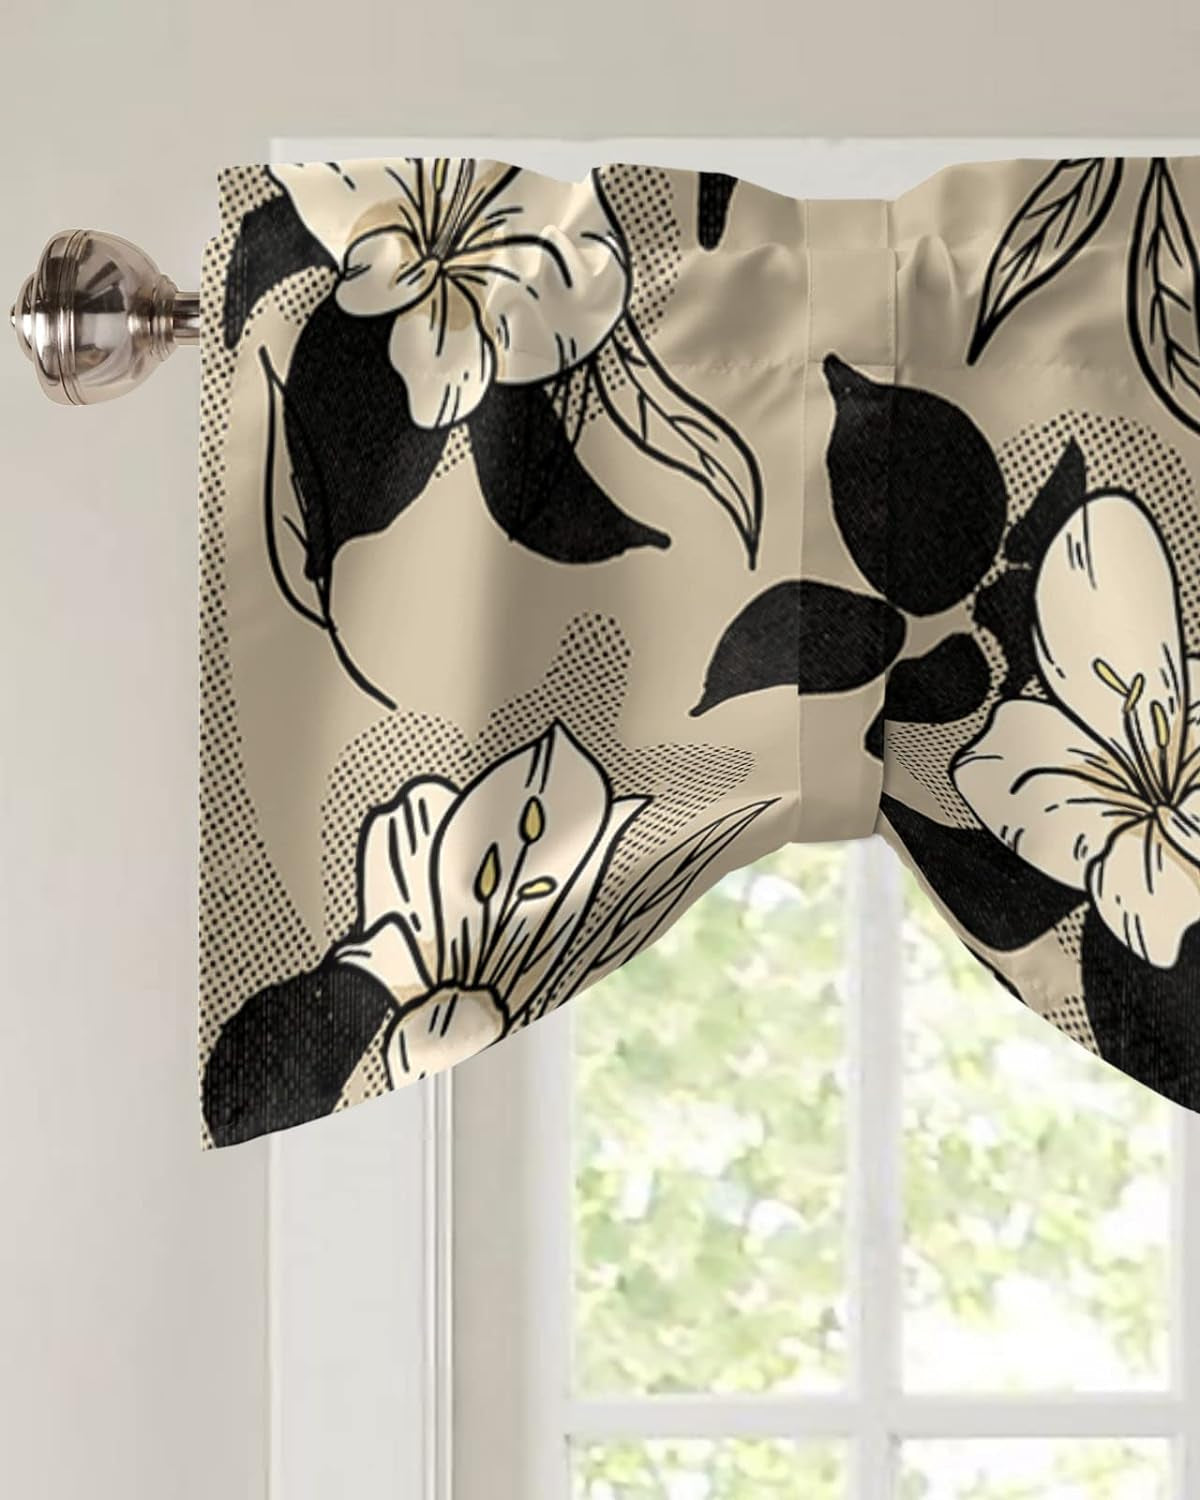 Black Beige Flower Tie up Valance Curtains for Windows, Kitchen Curtains Window Treatments, Rustic Retro Beige Leaves Botanical Short Window Shades Valances for Bedroom Bathroom Cafe 54"X18"